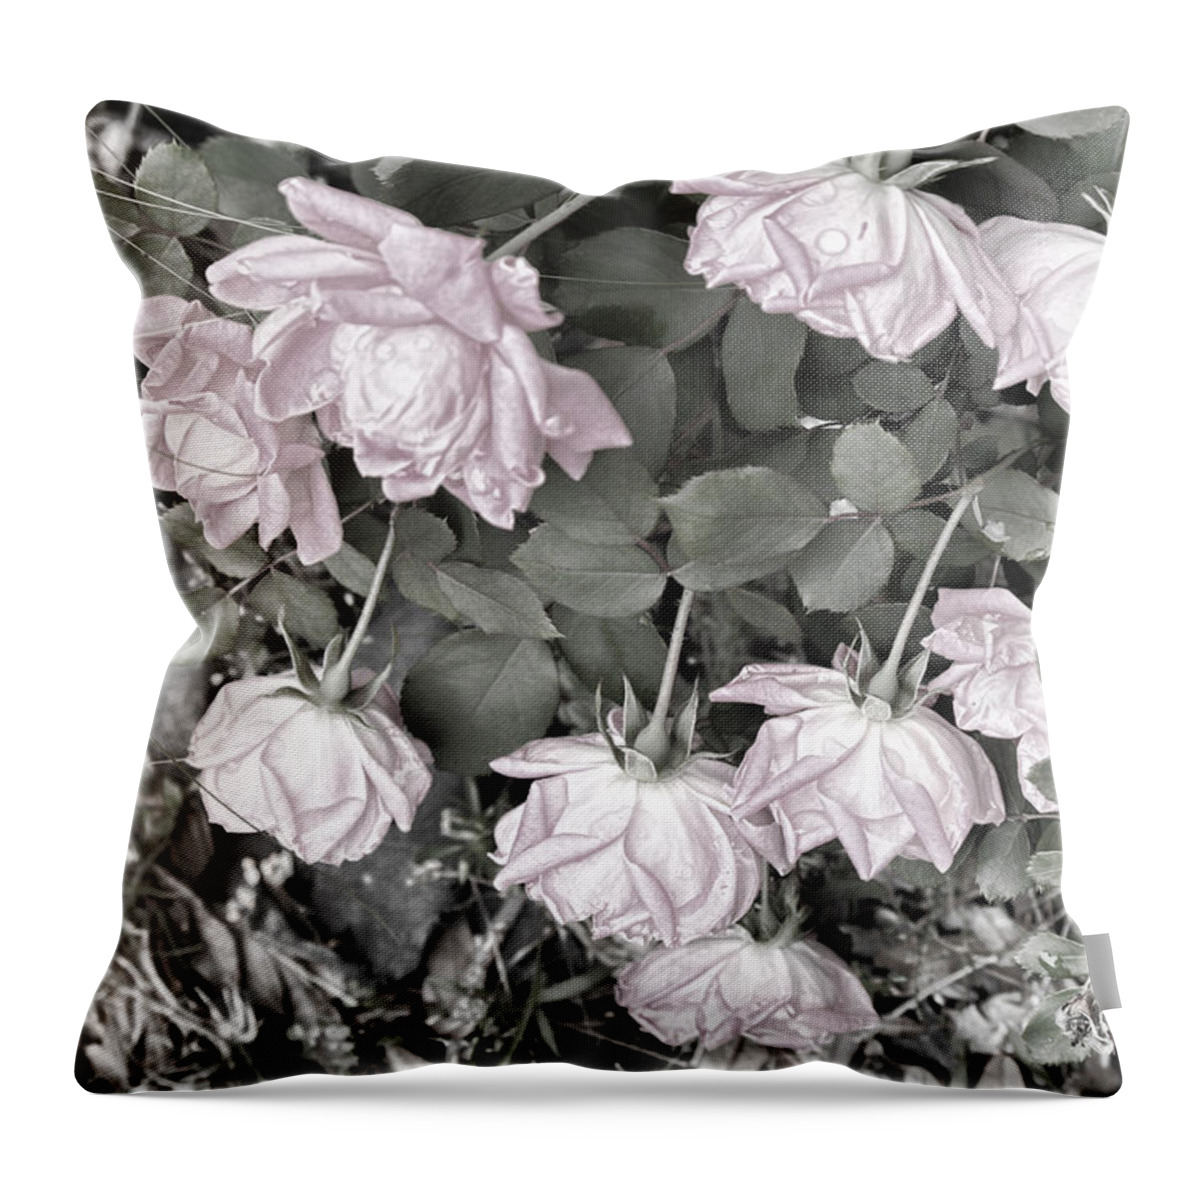 Roses Throw Pillow featuring the digital art Falling Roses by Bonnie Willis